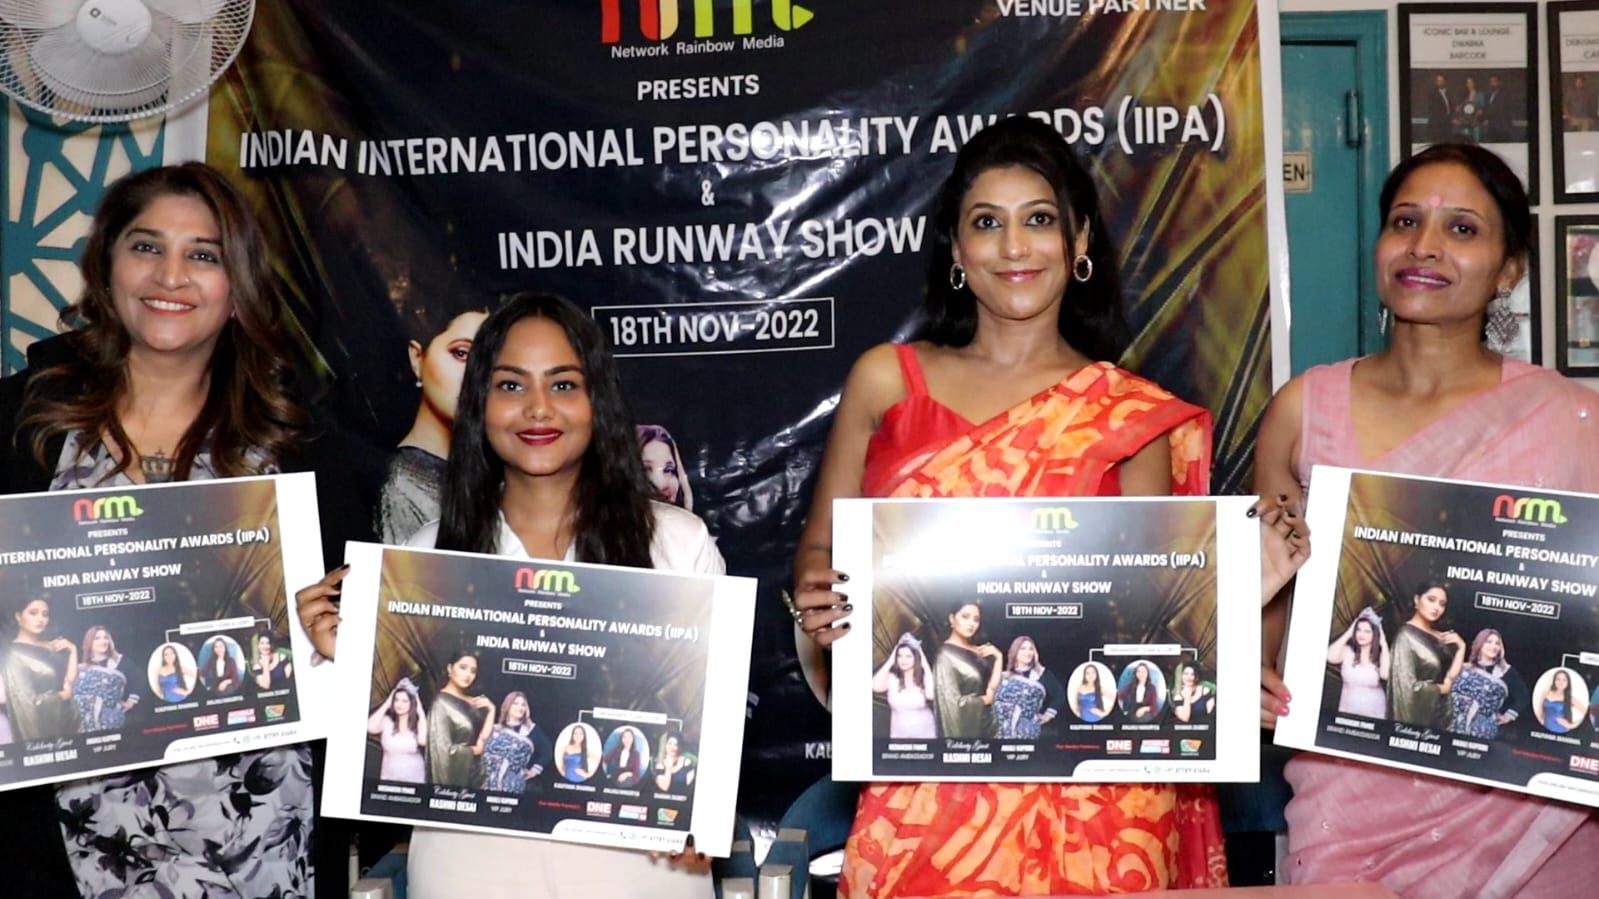 NETWORK RAINBOW MEDIA , coming with IIPA -AWARDS & INDIA RUNWAY SHOW with celebrity guest RASHAMI DESAI on 18th nov -22 in New Delhi.